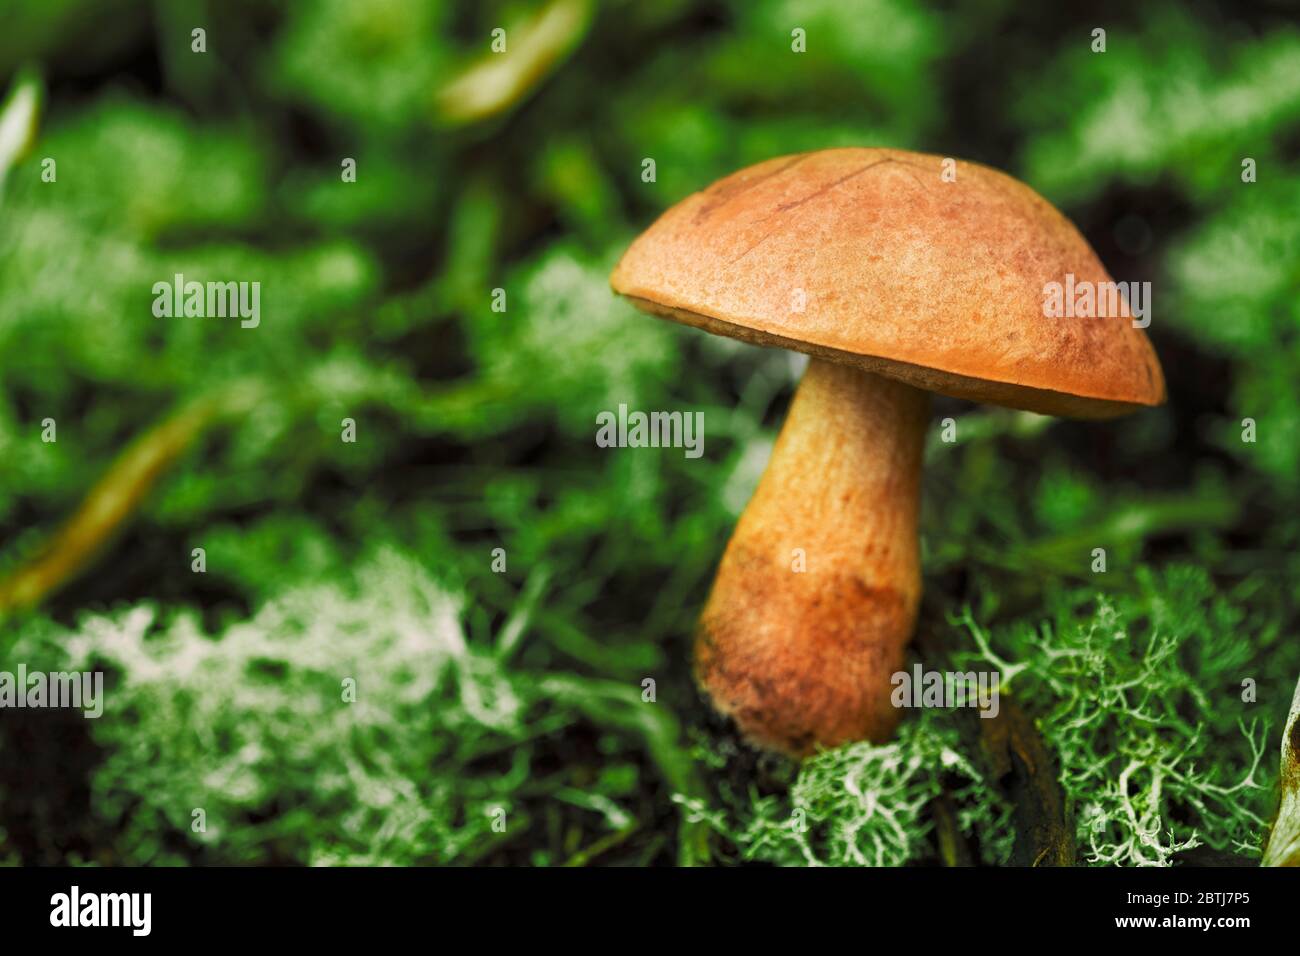 Close up shot of a toxic mushroom in nature and a green background. Stock Photo